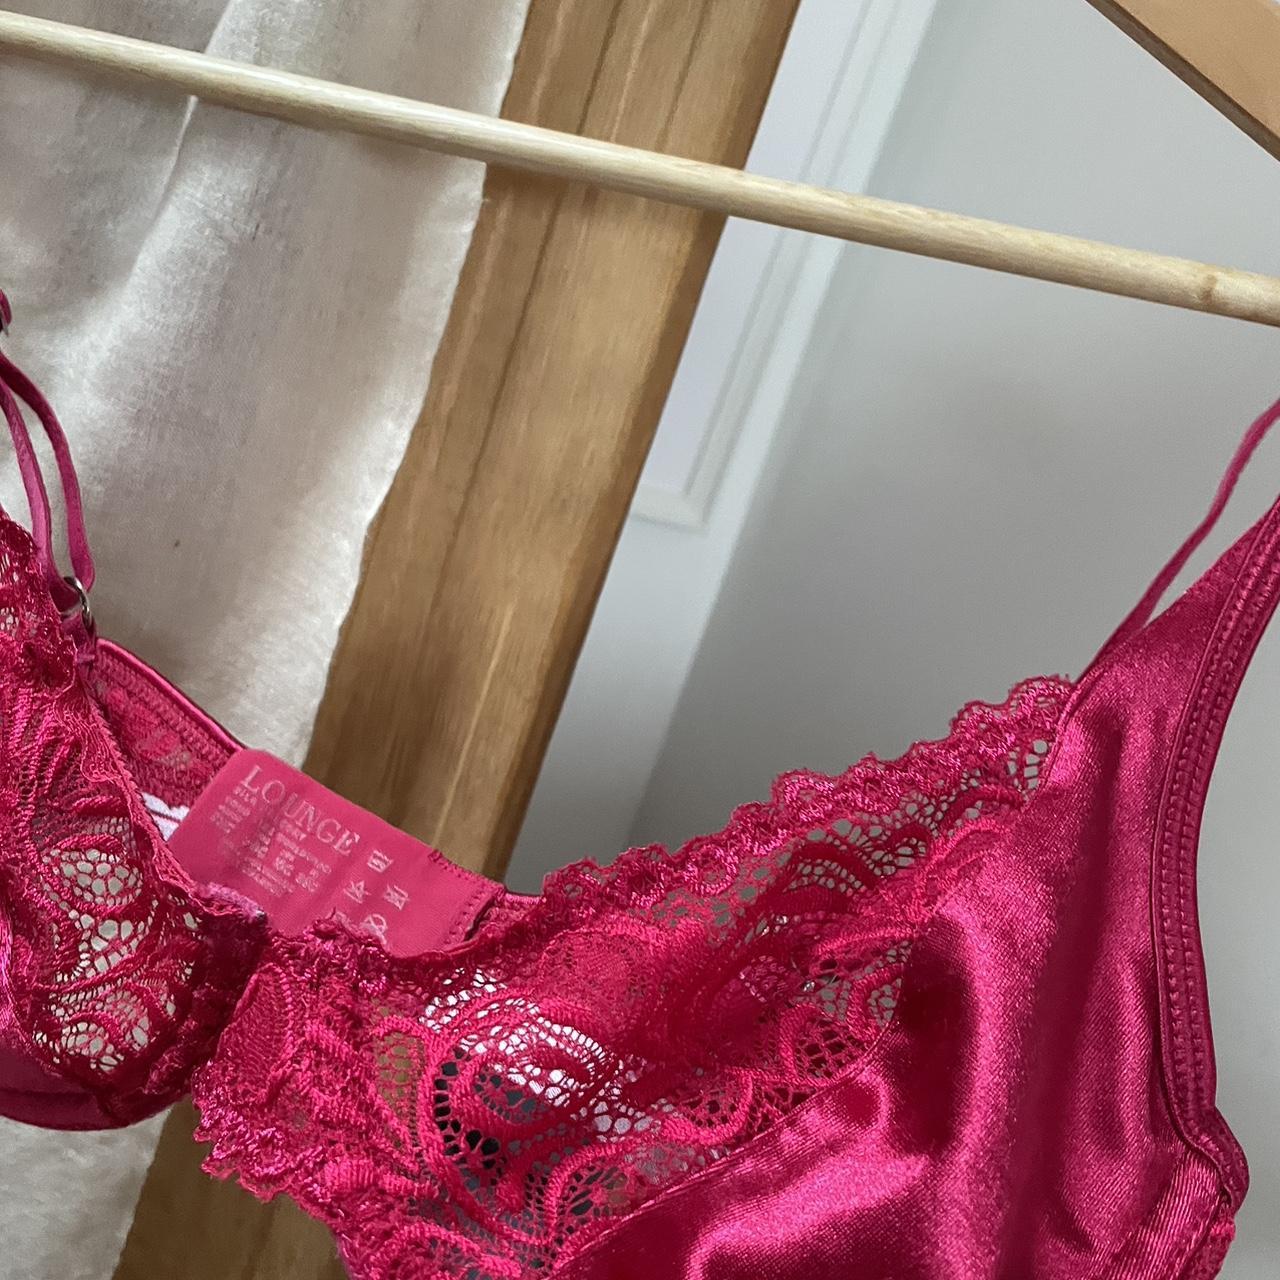 Red satin and lace bra set, Lounge underwear